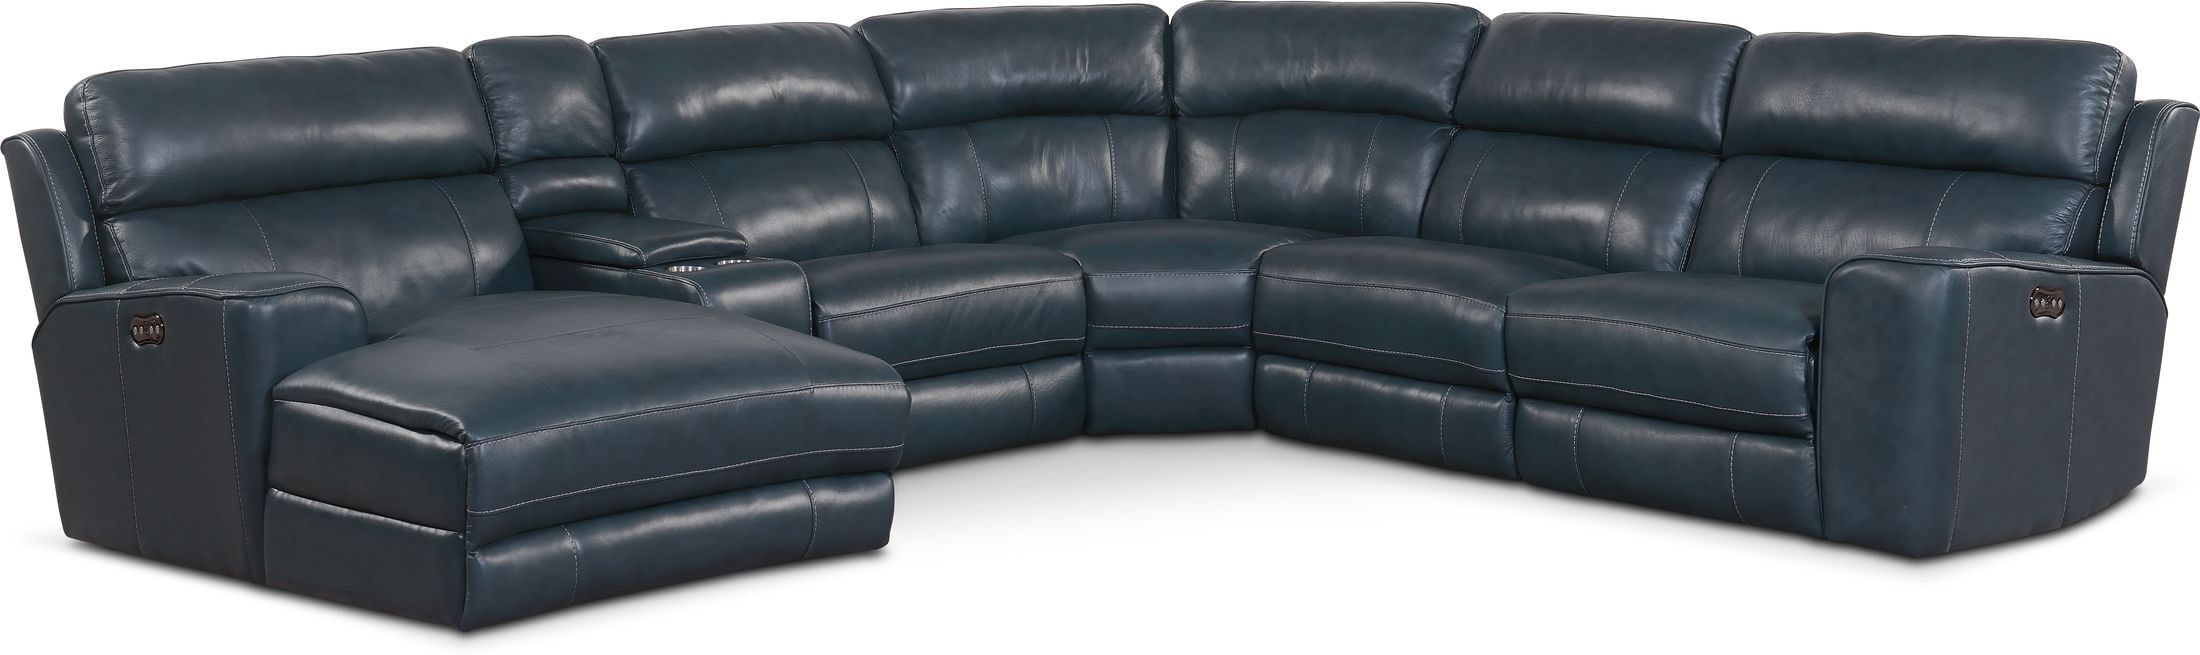 Newport 6 Piece Dual Power Reclining Sectional With Chaise For Forte Gray Power Reclining Sofas (View 9 of 15)